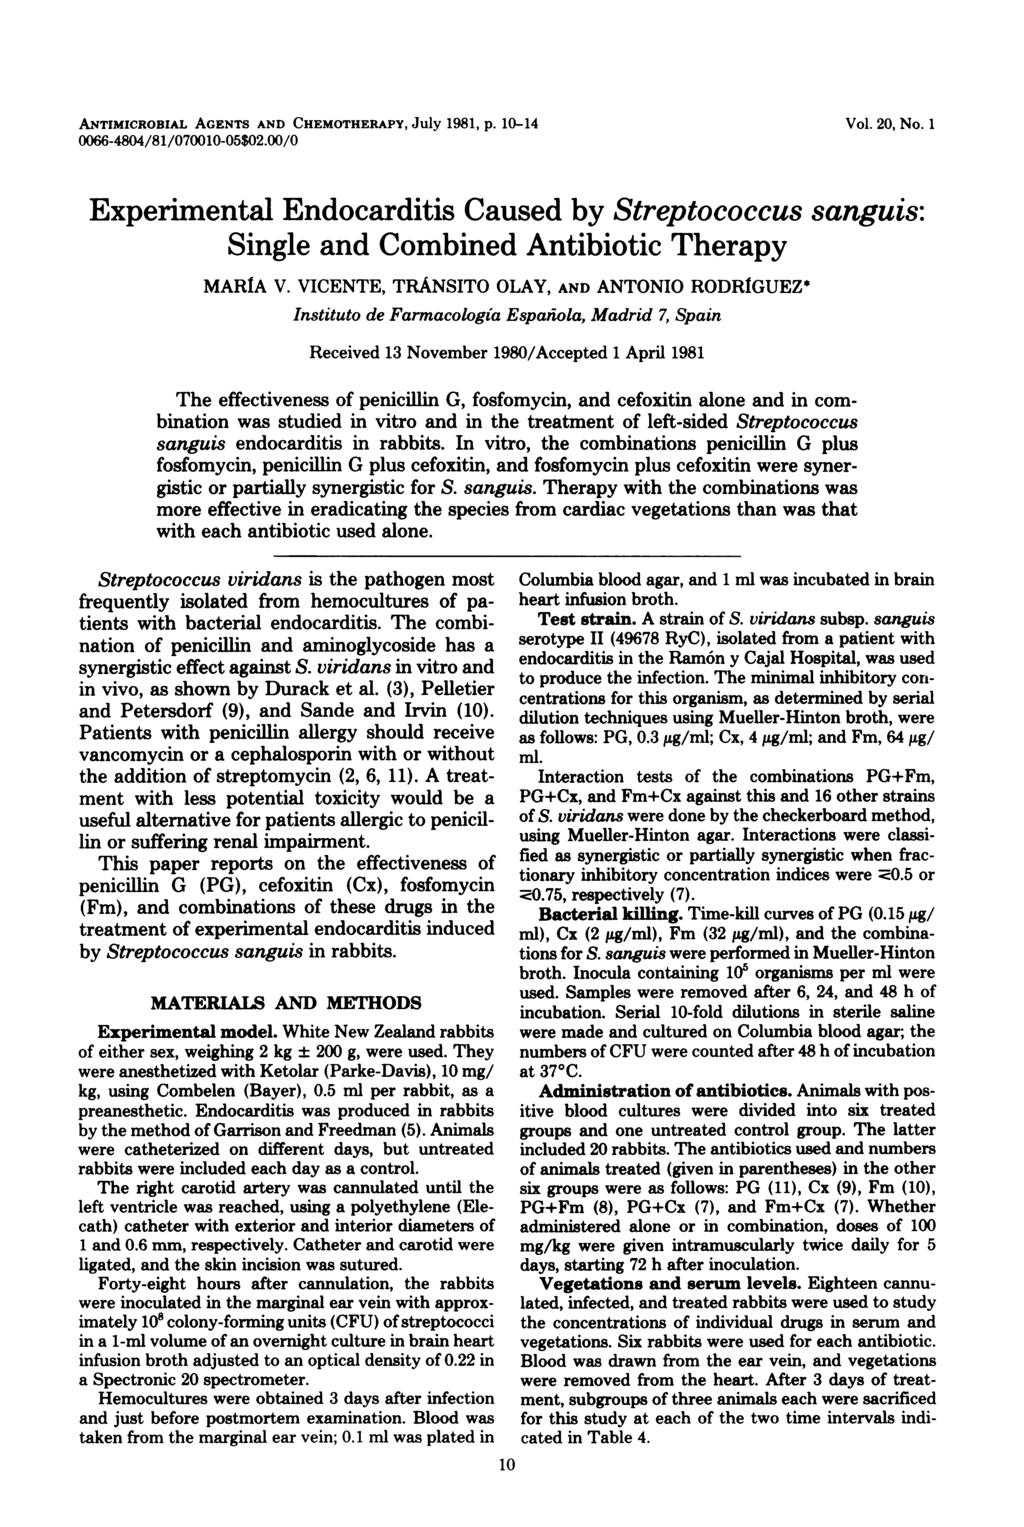 ANTIMICROBIAL AGENTS AND CHEMOTHERAPY, July 1981, p. 1-14 66-484/81/71-5$2./ Vol. 2, No. 1 Experimental Endocarditis Caused by Streptococcus sanguis: Single and Combined Antibiotic Therapy MARIA V.